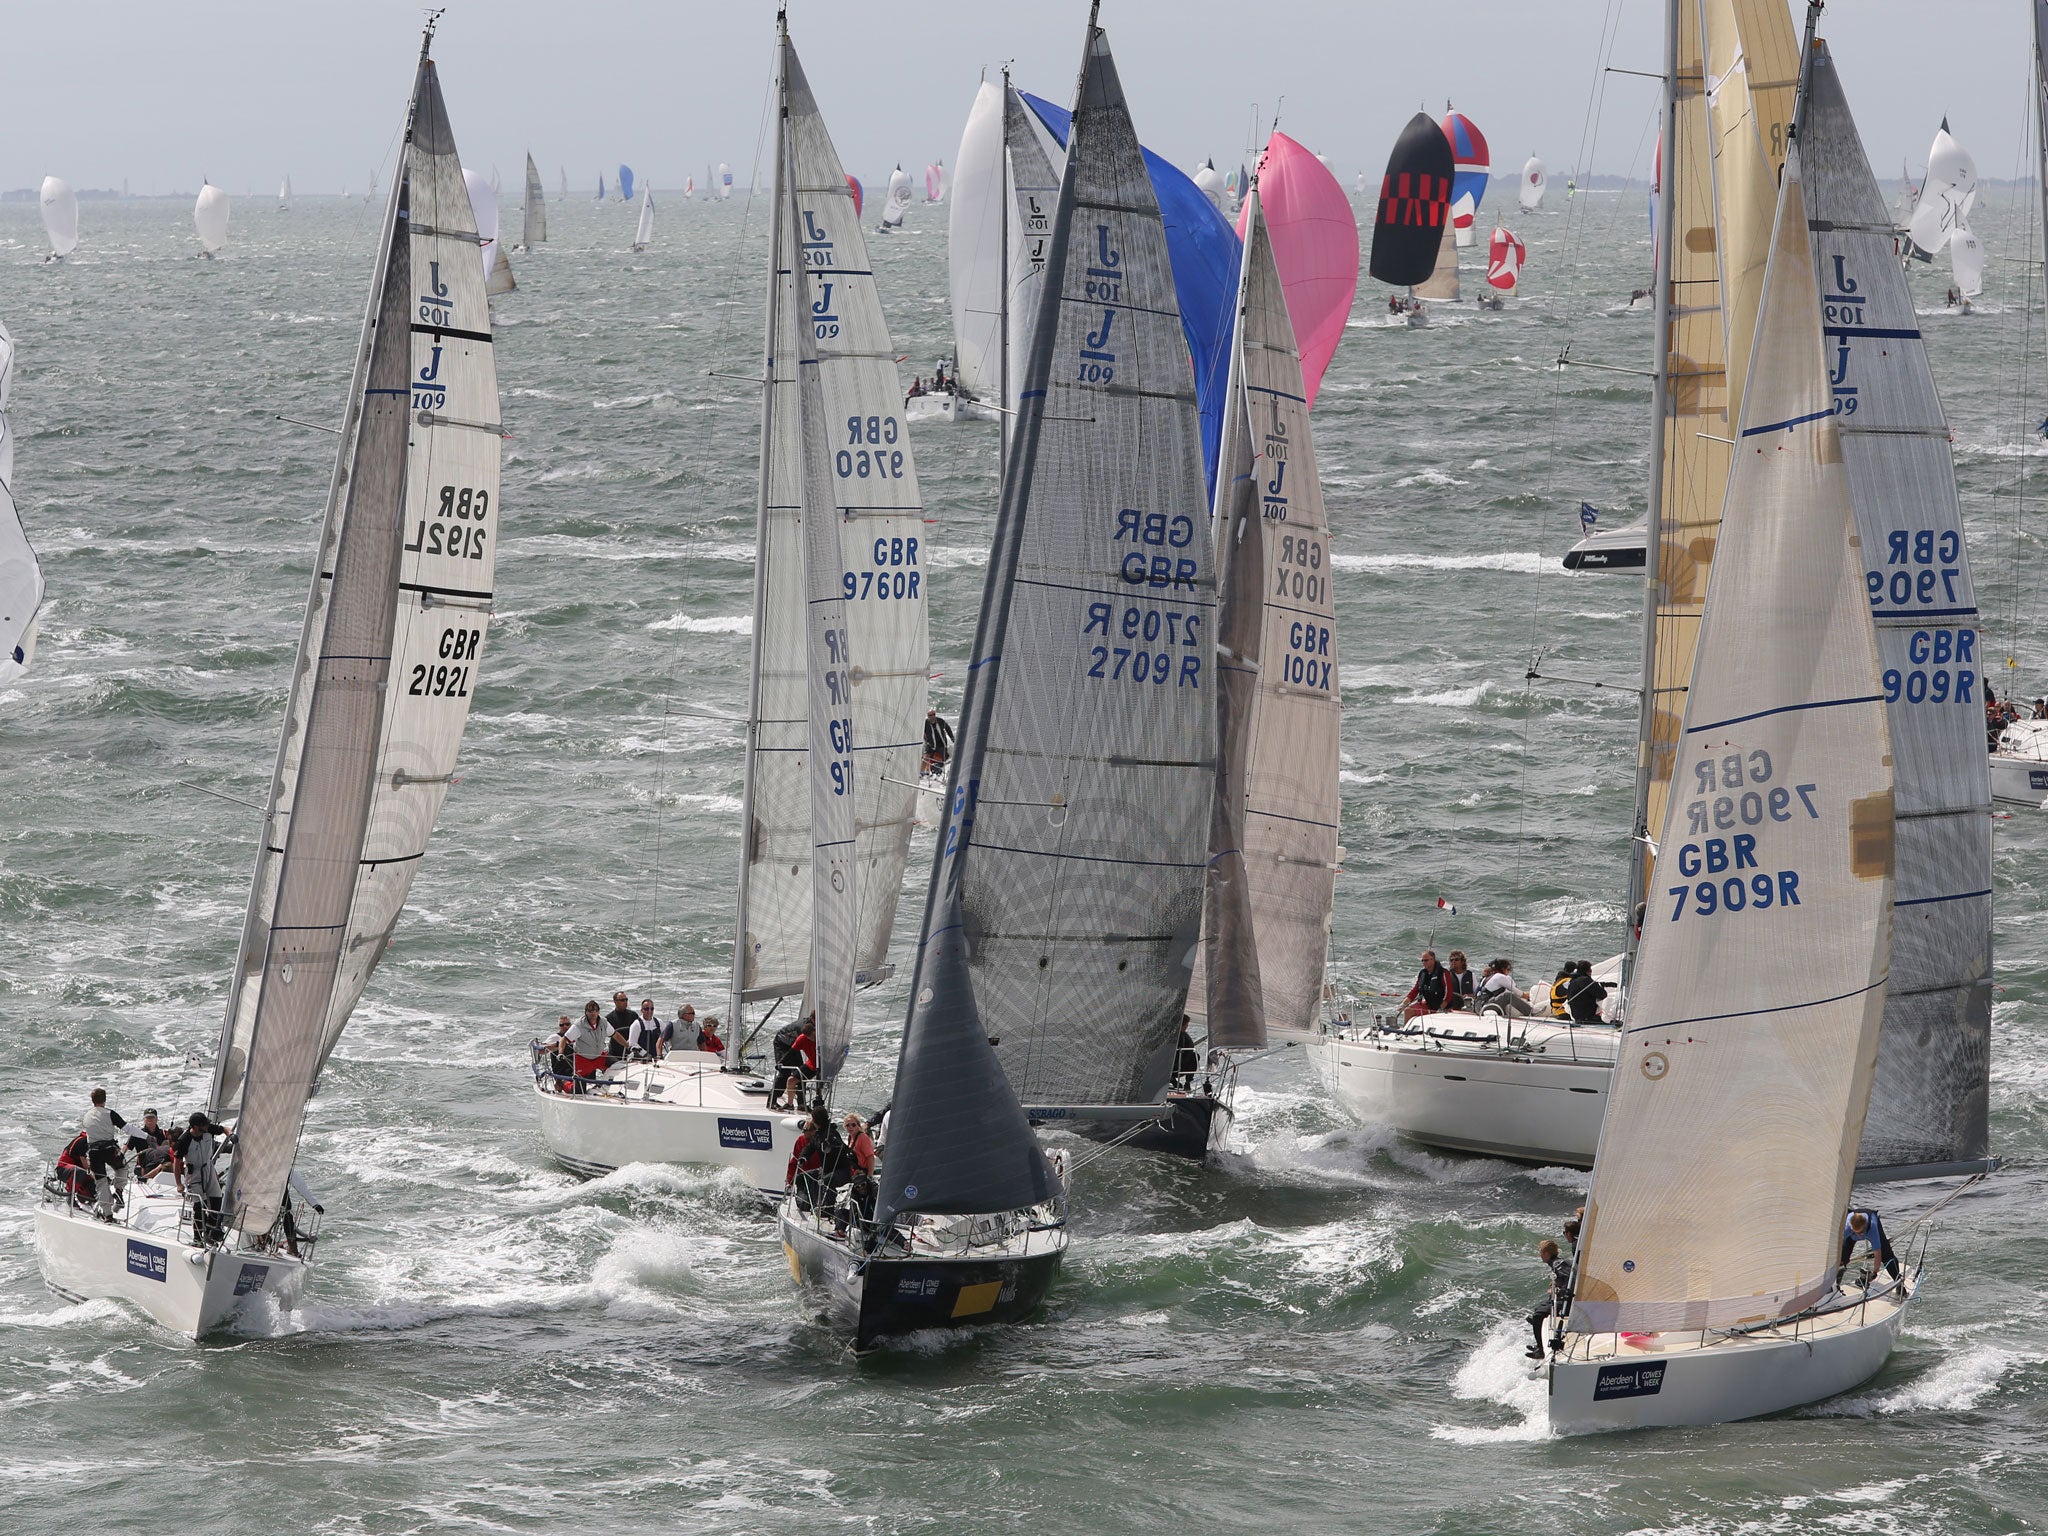 A jumble of J109s jostles for position approaching a mark rounding in the Solent on the second day of AAM Cowes Week.